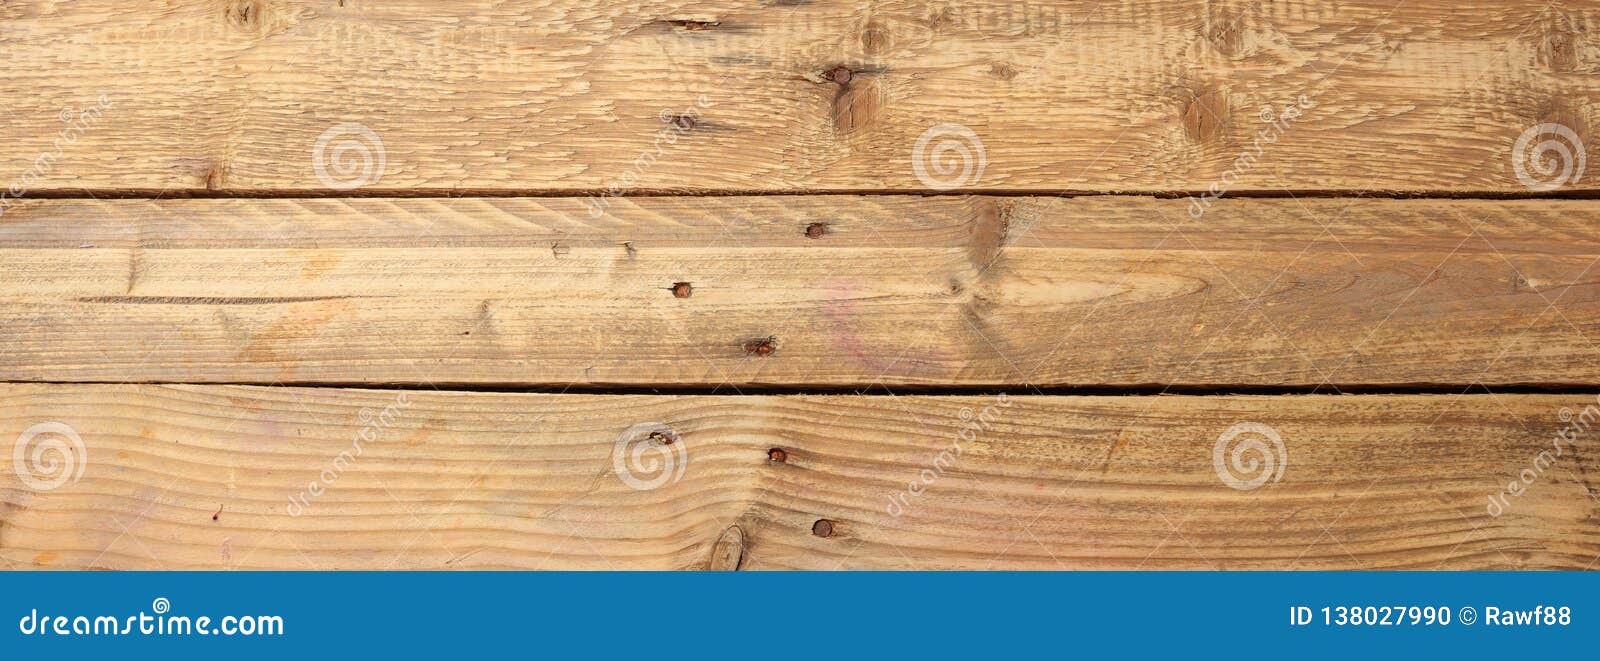 wood planks, floor or wall, natural board background, banner